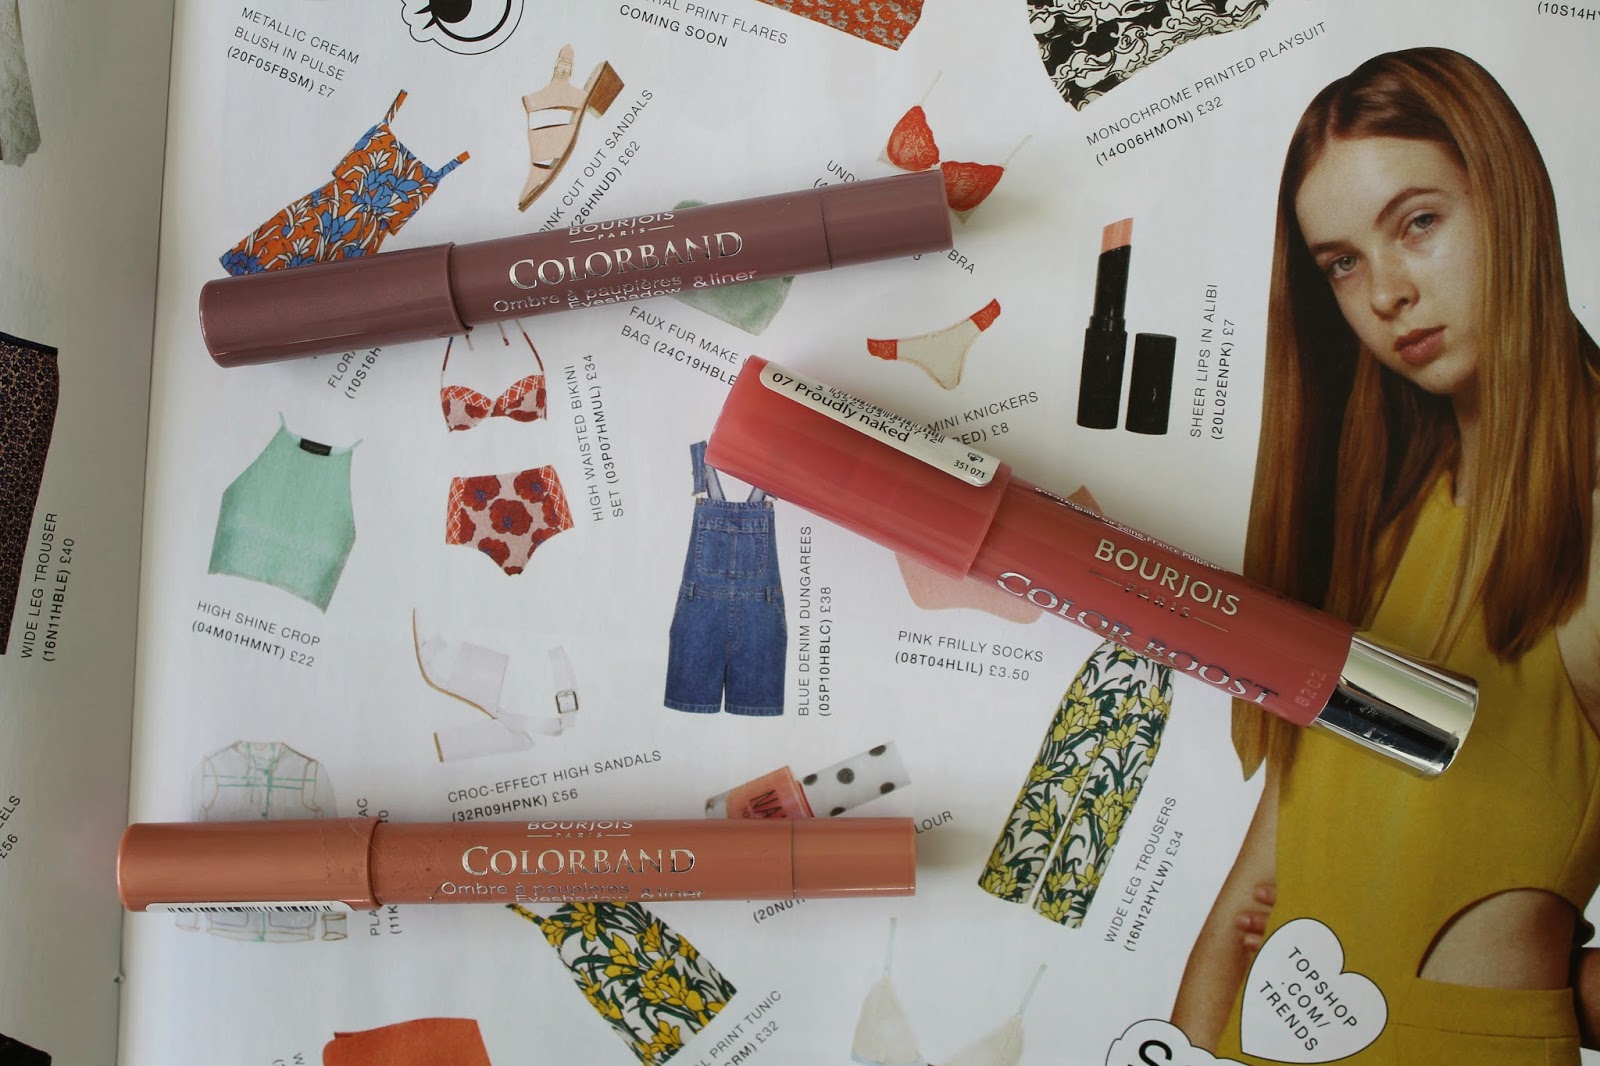 Bourjous Colorband Eyeshadow in 04 Rose Fauviste and 05 Mauve Baroque and Colorboost Lip Crayon in 07 Proudly Naked